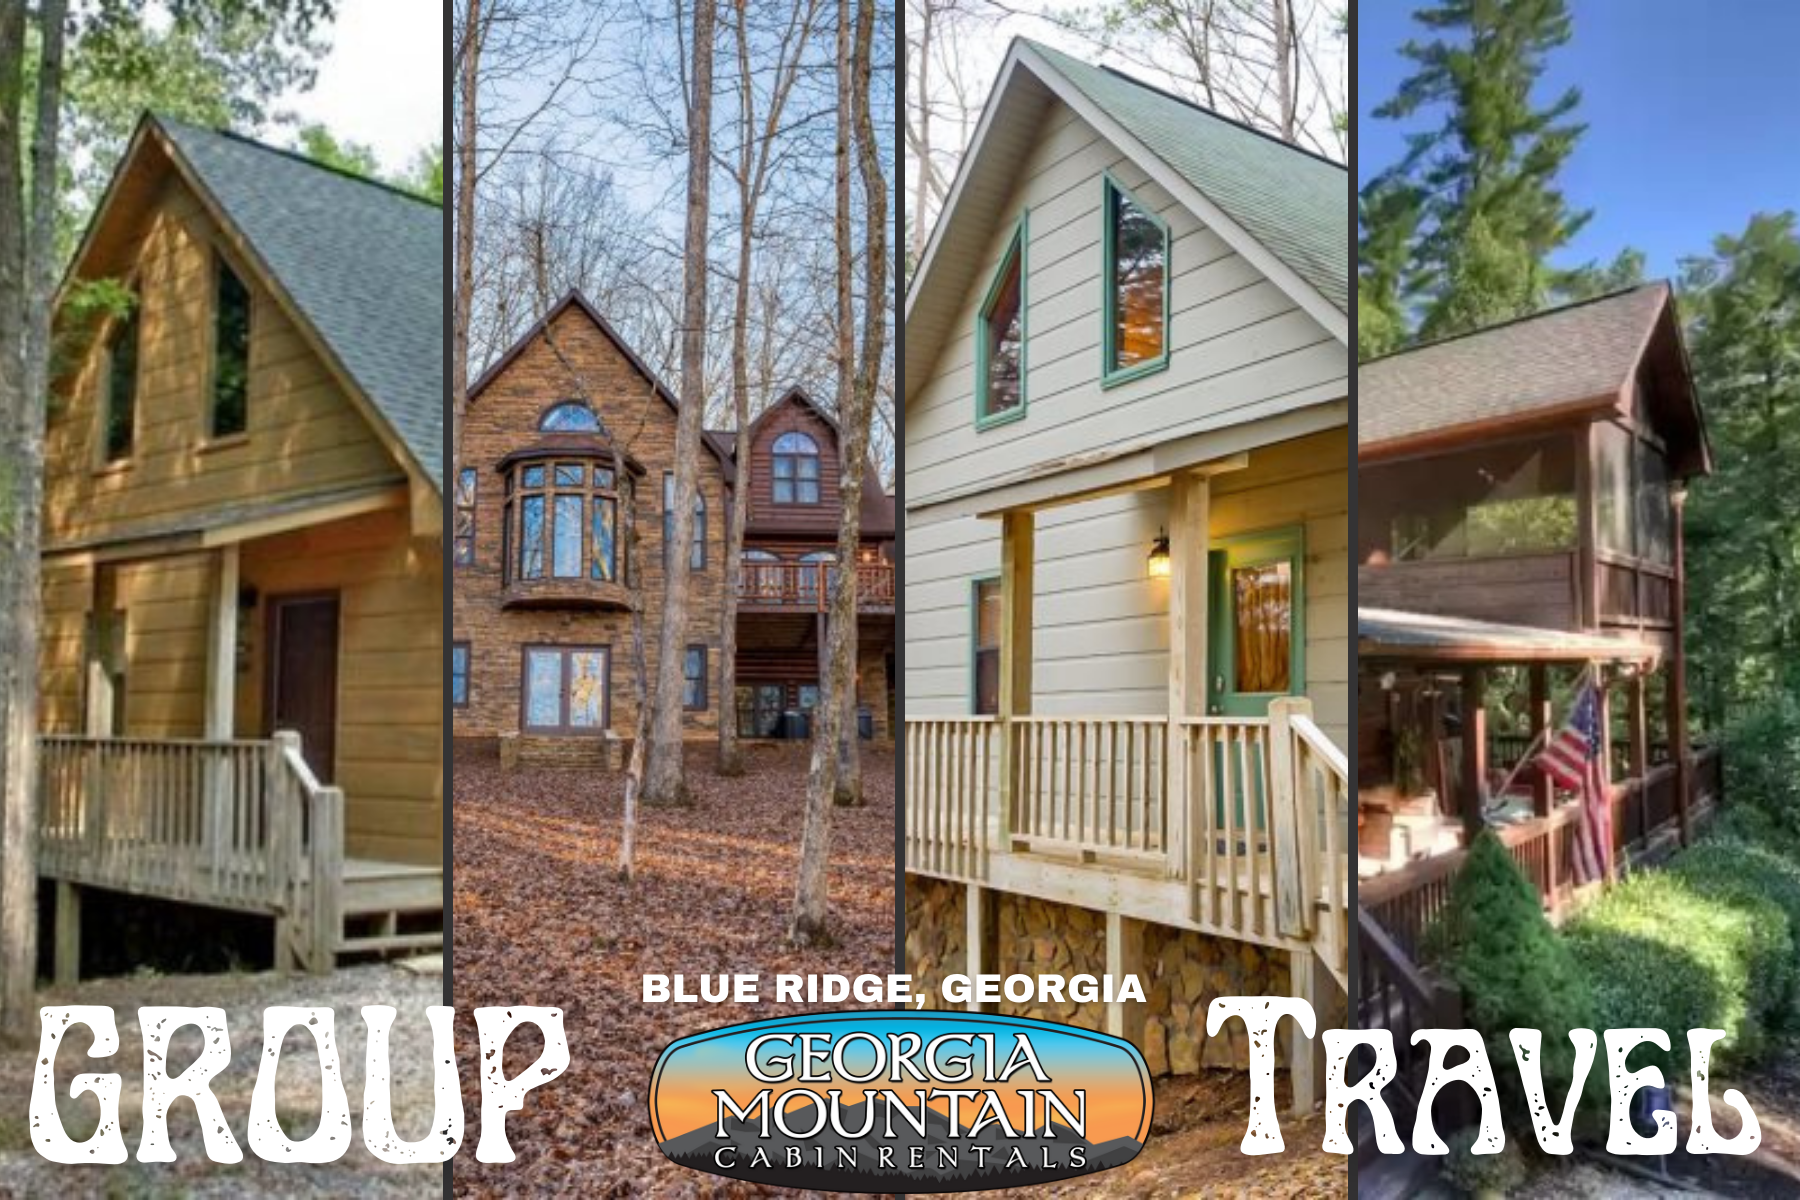 Group of 4 properties by Georgia Mountain cabin Rental - Blue Ridge Group Accommodations